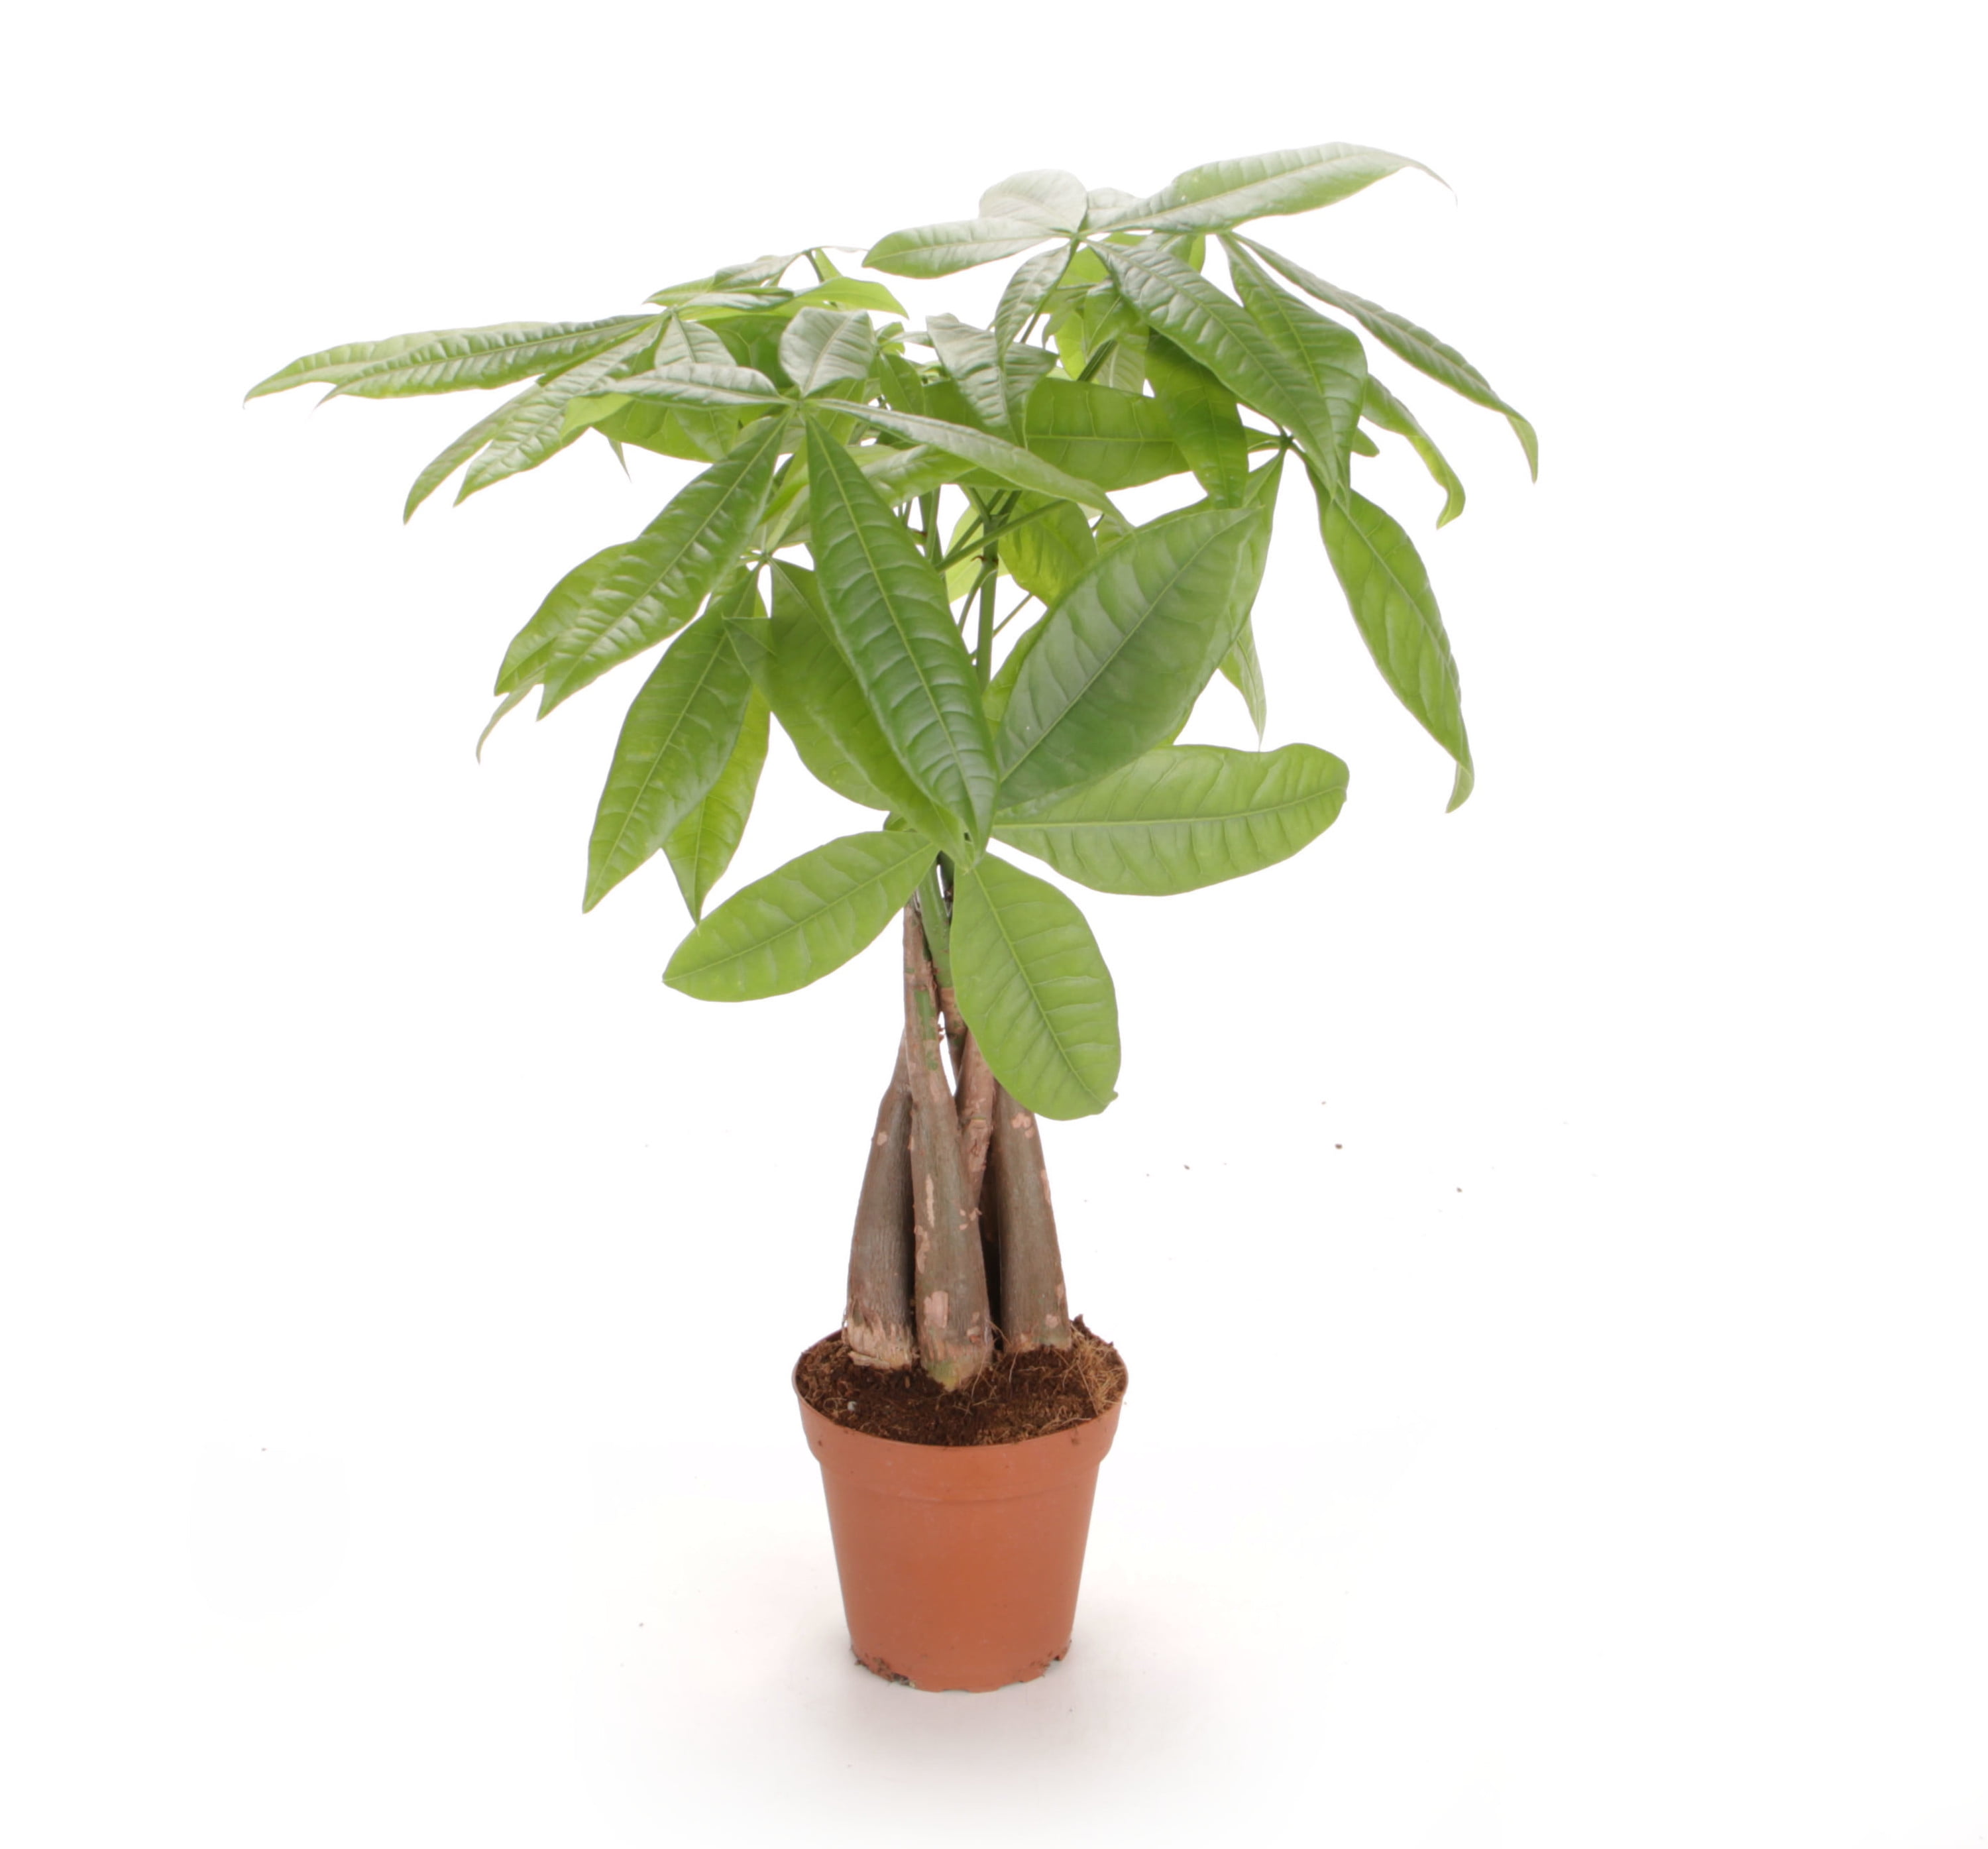 costa farms live indoor 16in. tall green money tree; medium, indirect light  plant in 5in. grower pot